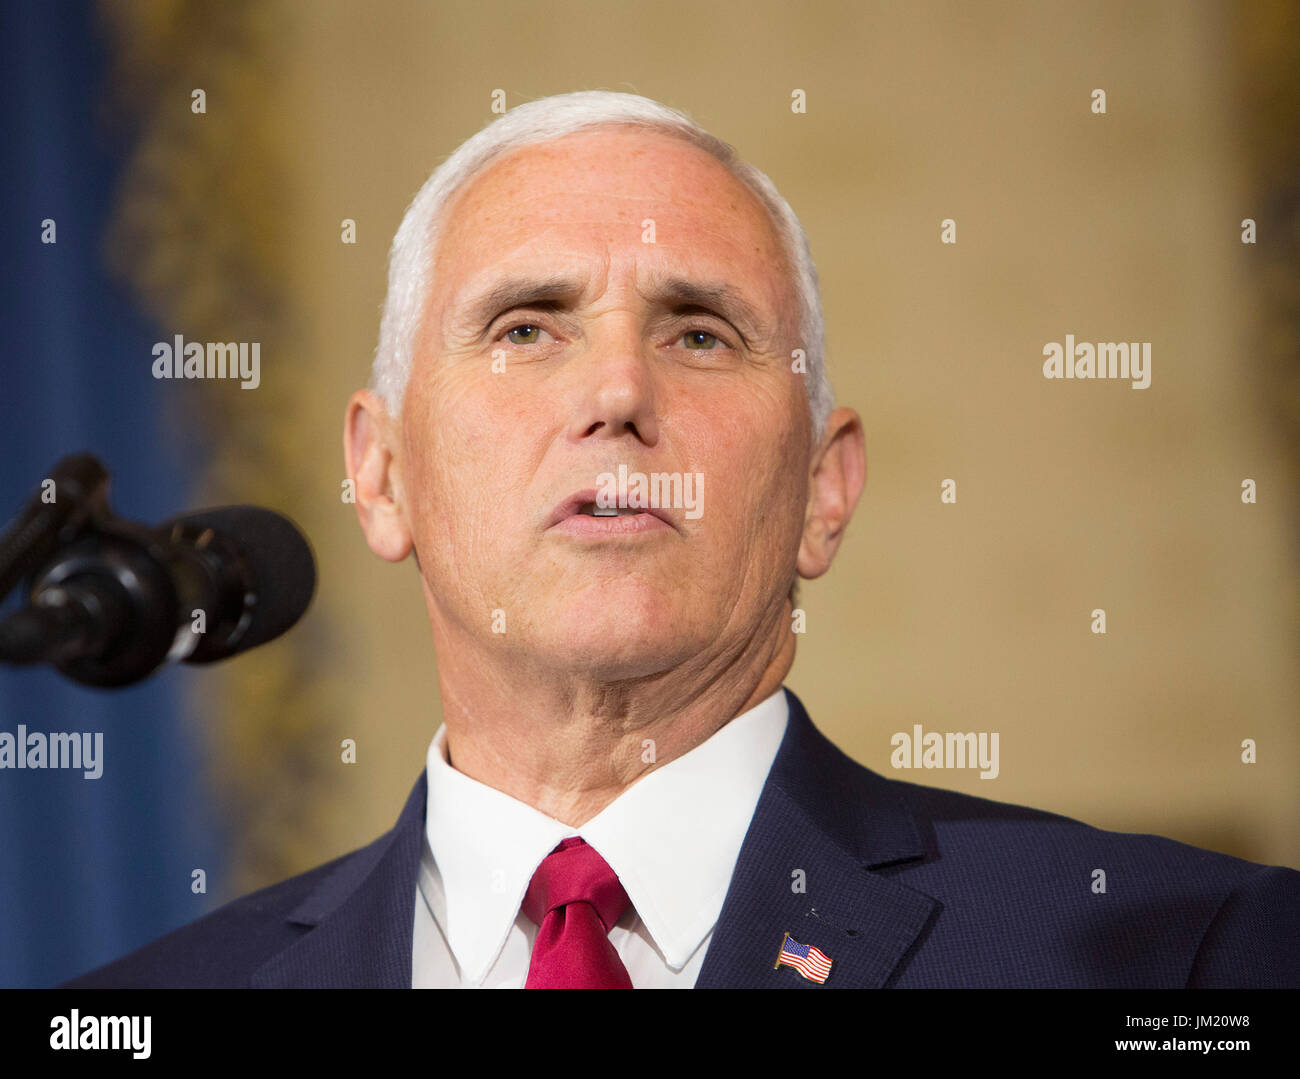 United States Vice President Mike Pence introduces President Trump to make a statement on health care at The White House in Washington, DC, July 24, 2017. Credit: Chris Kleponis/CNP /MediaPunch Stock Photo